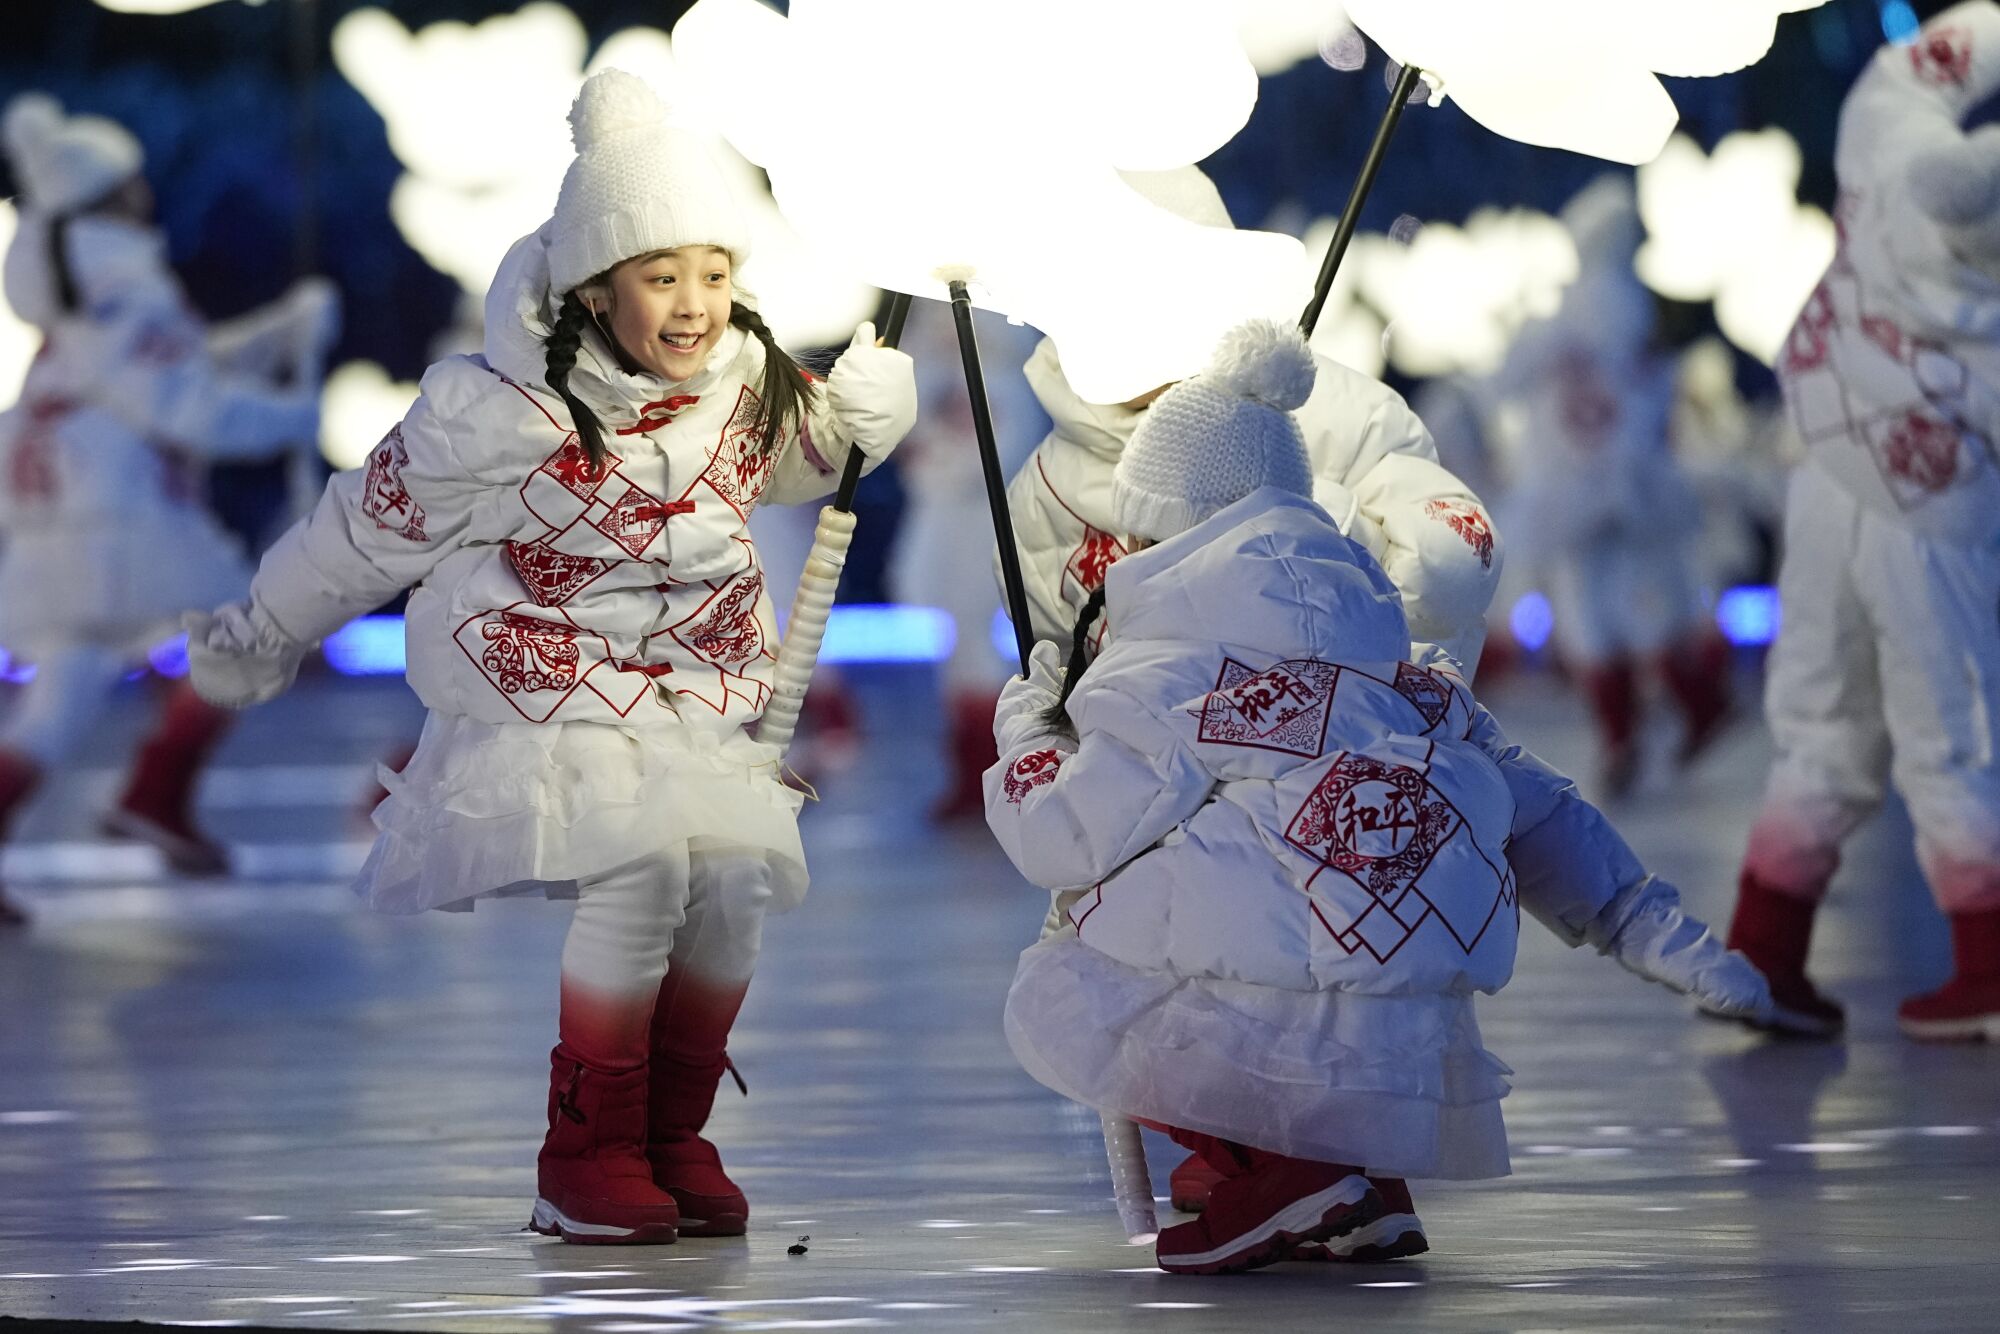 Hundreds of children perform in a segment called "The Snowflake."